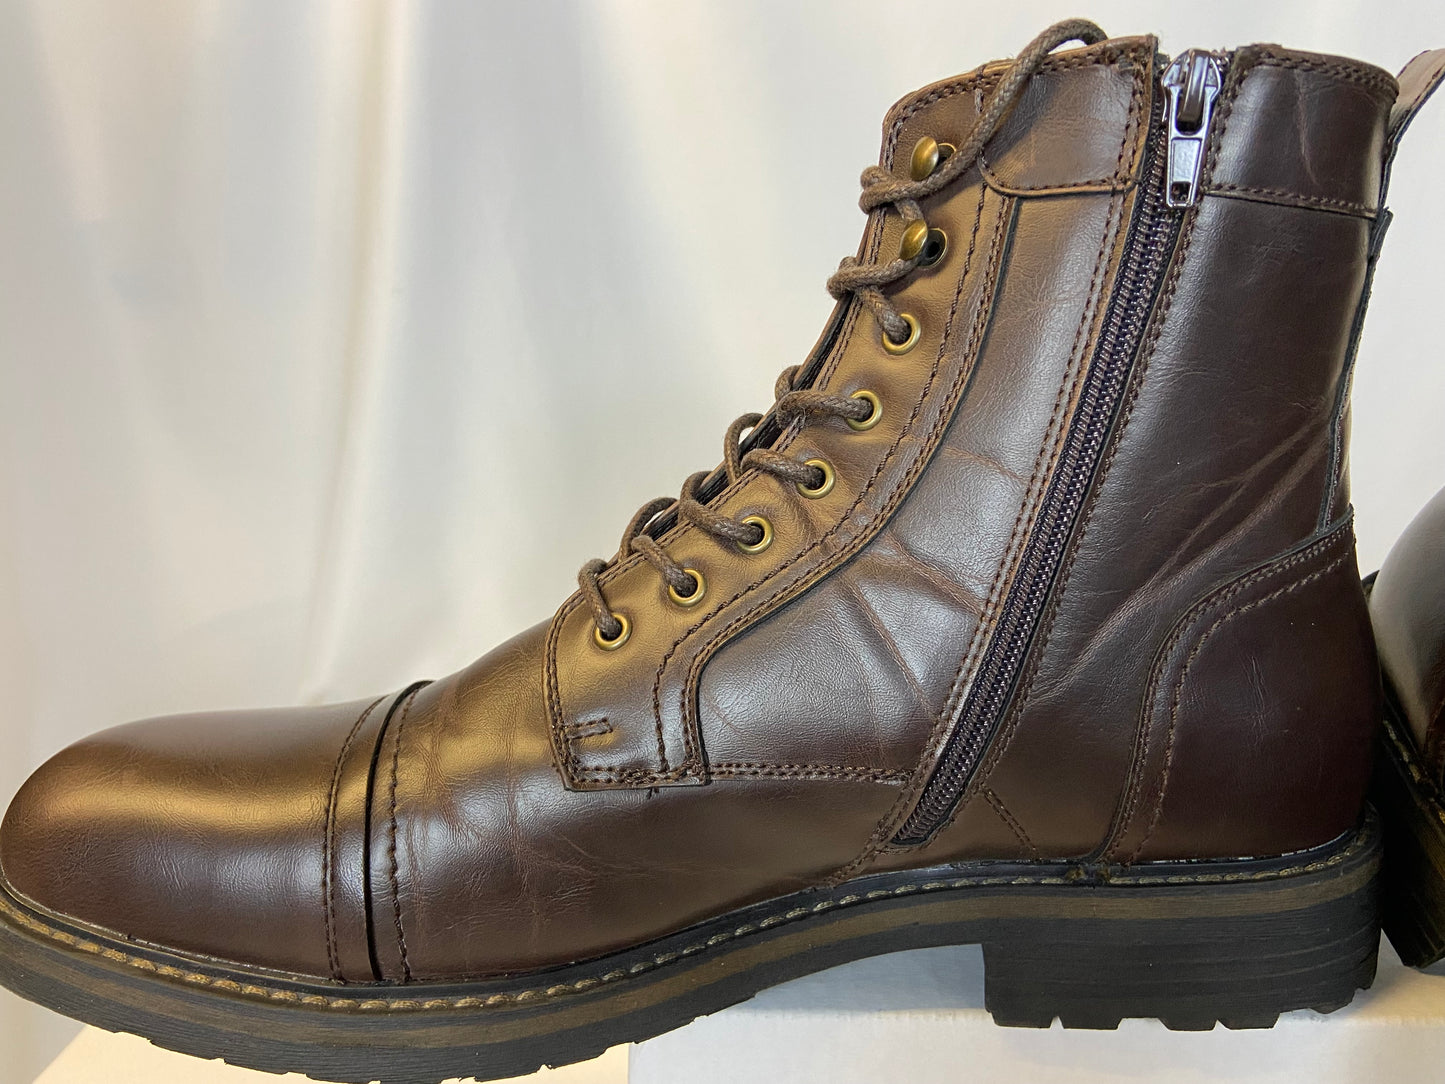 Public Opinion Brown Size 12M Lace Up Boots